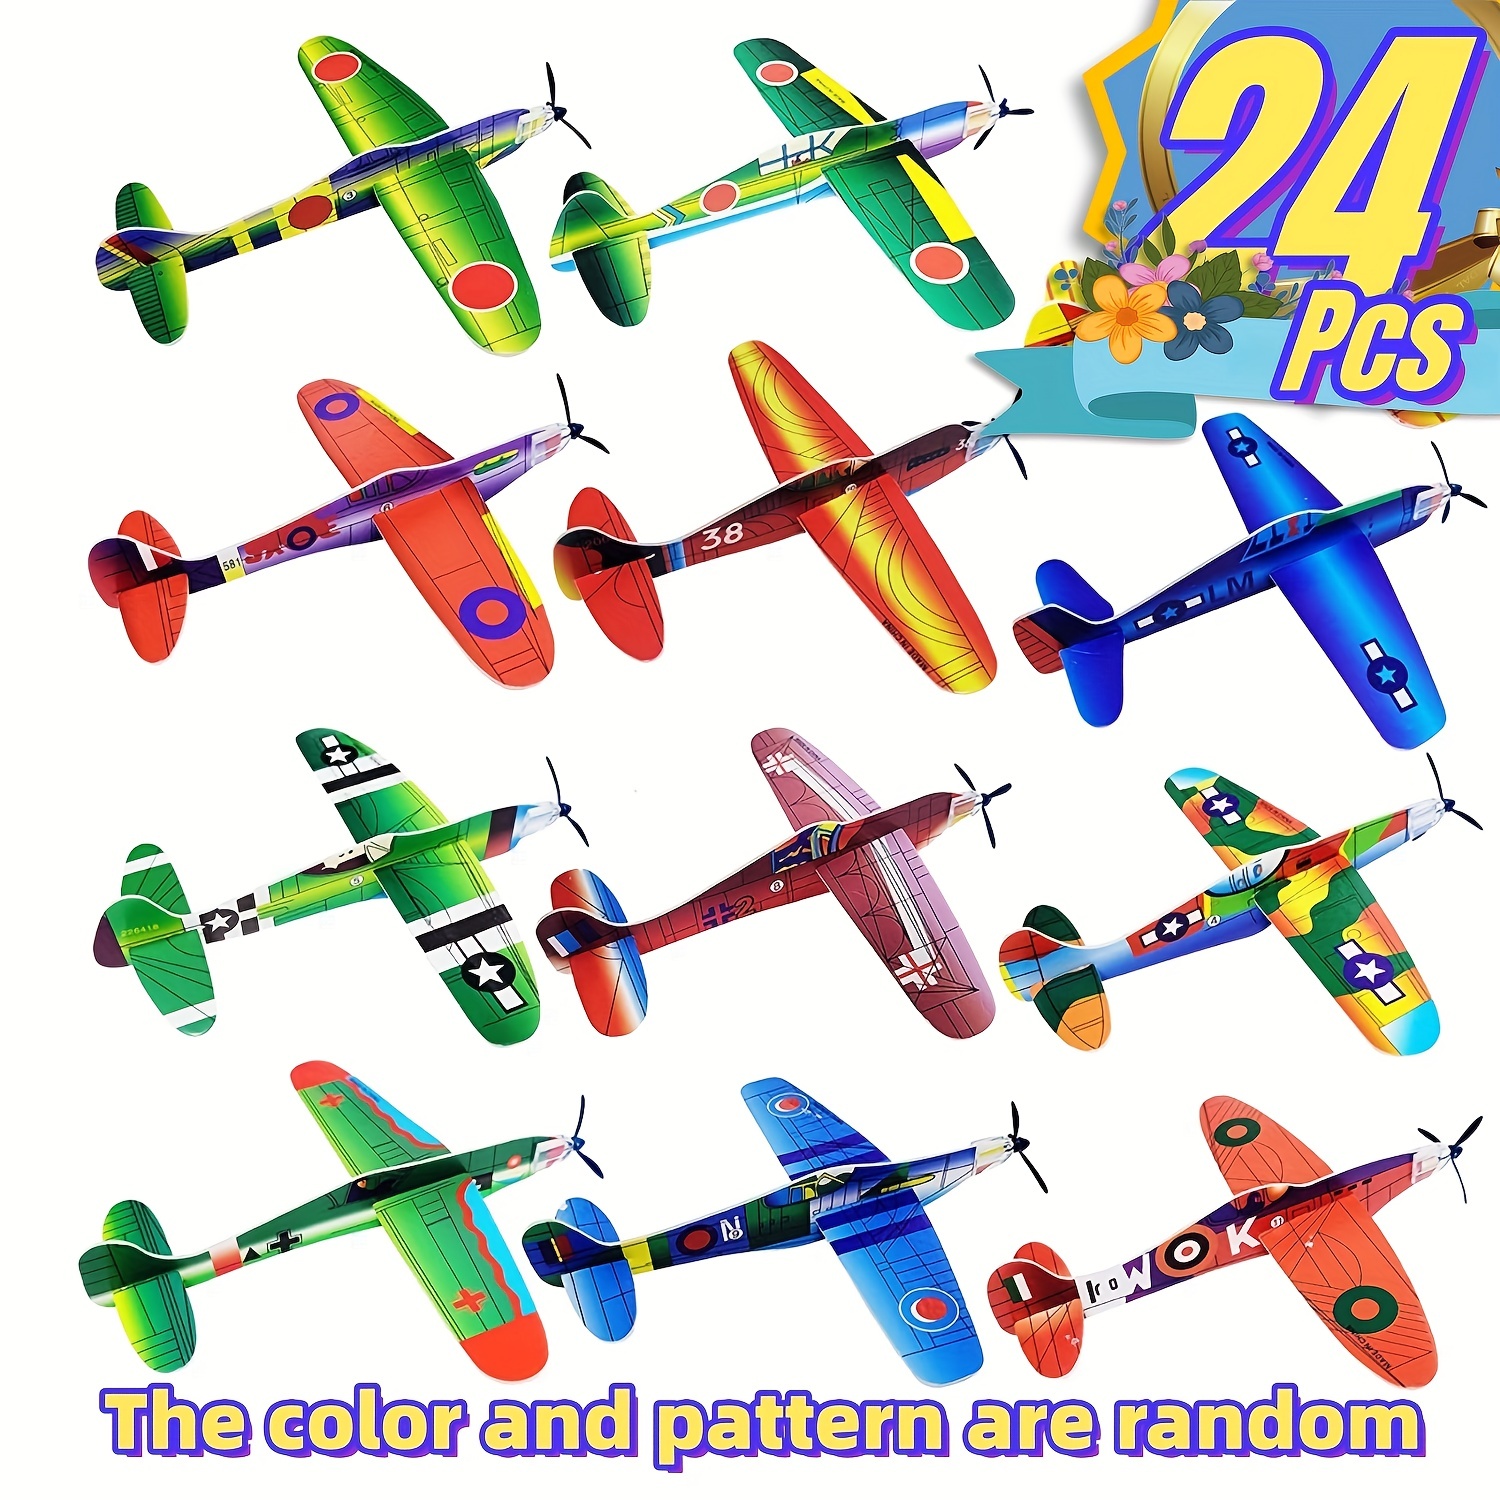 

24pcs 8 Inch Glider Planes - Birthday Party Favor Plane, Great Prize, Glider, Flying Models.